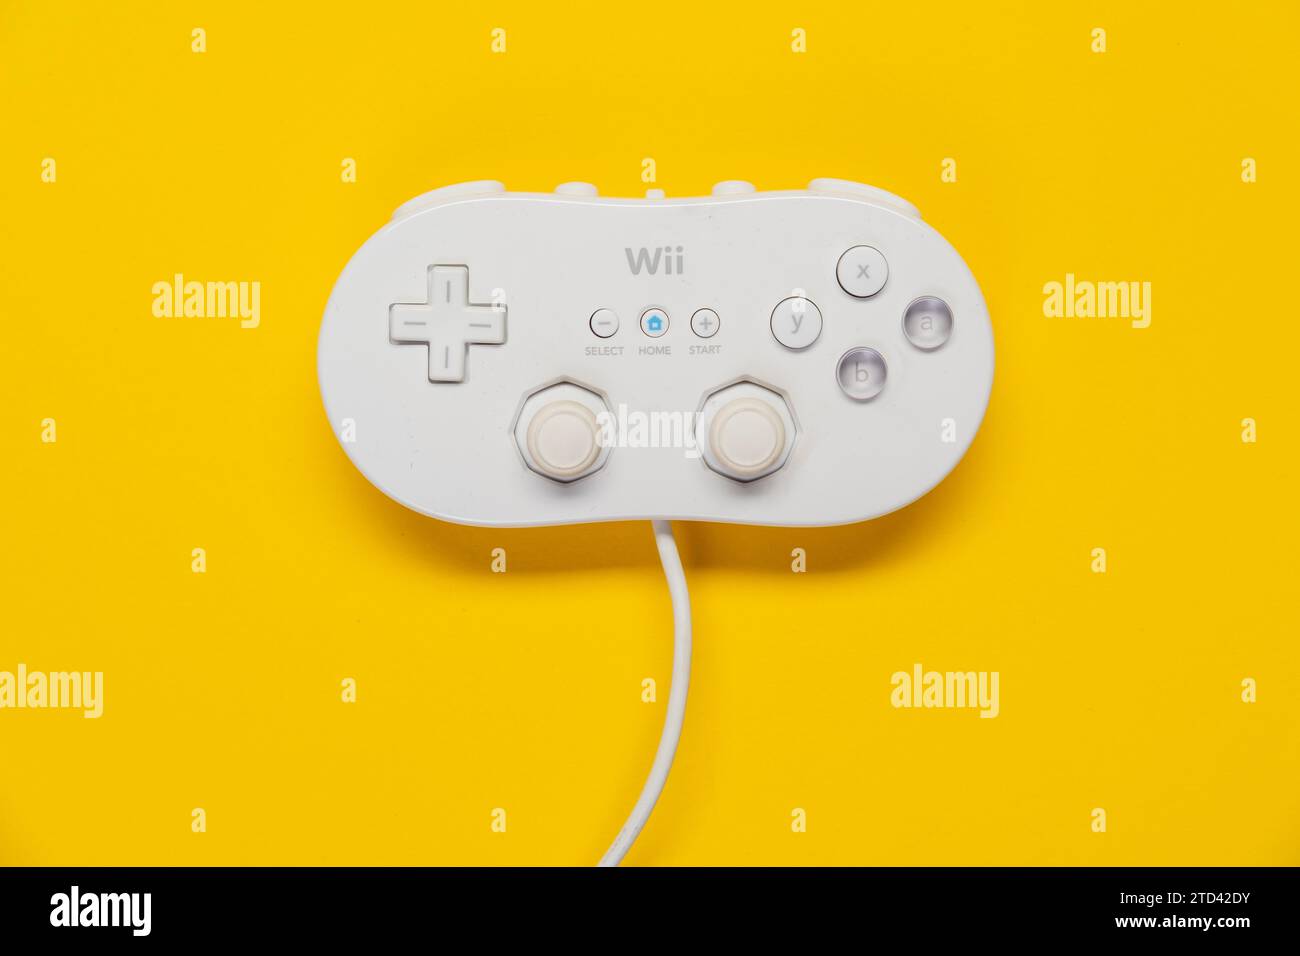 Classic game controller Nintendo Wii game console in front of plain yellow background, top view Stock Photo